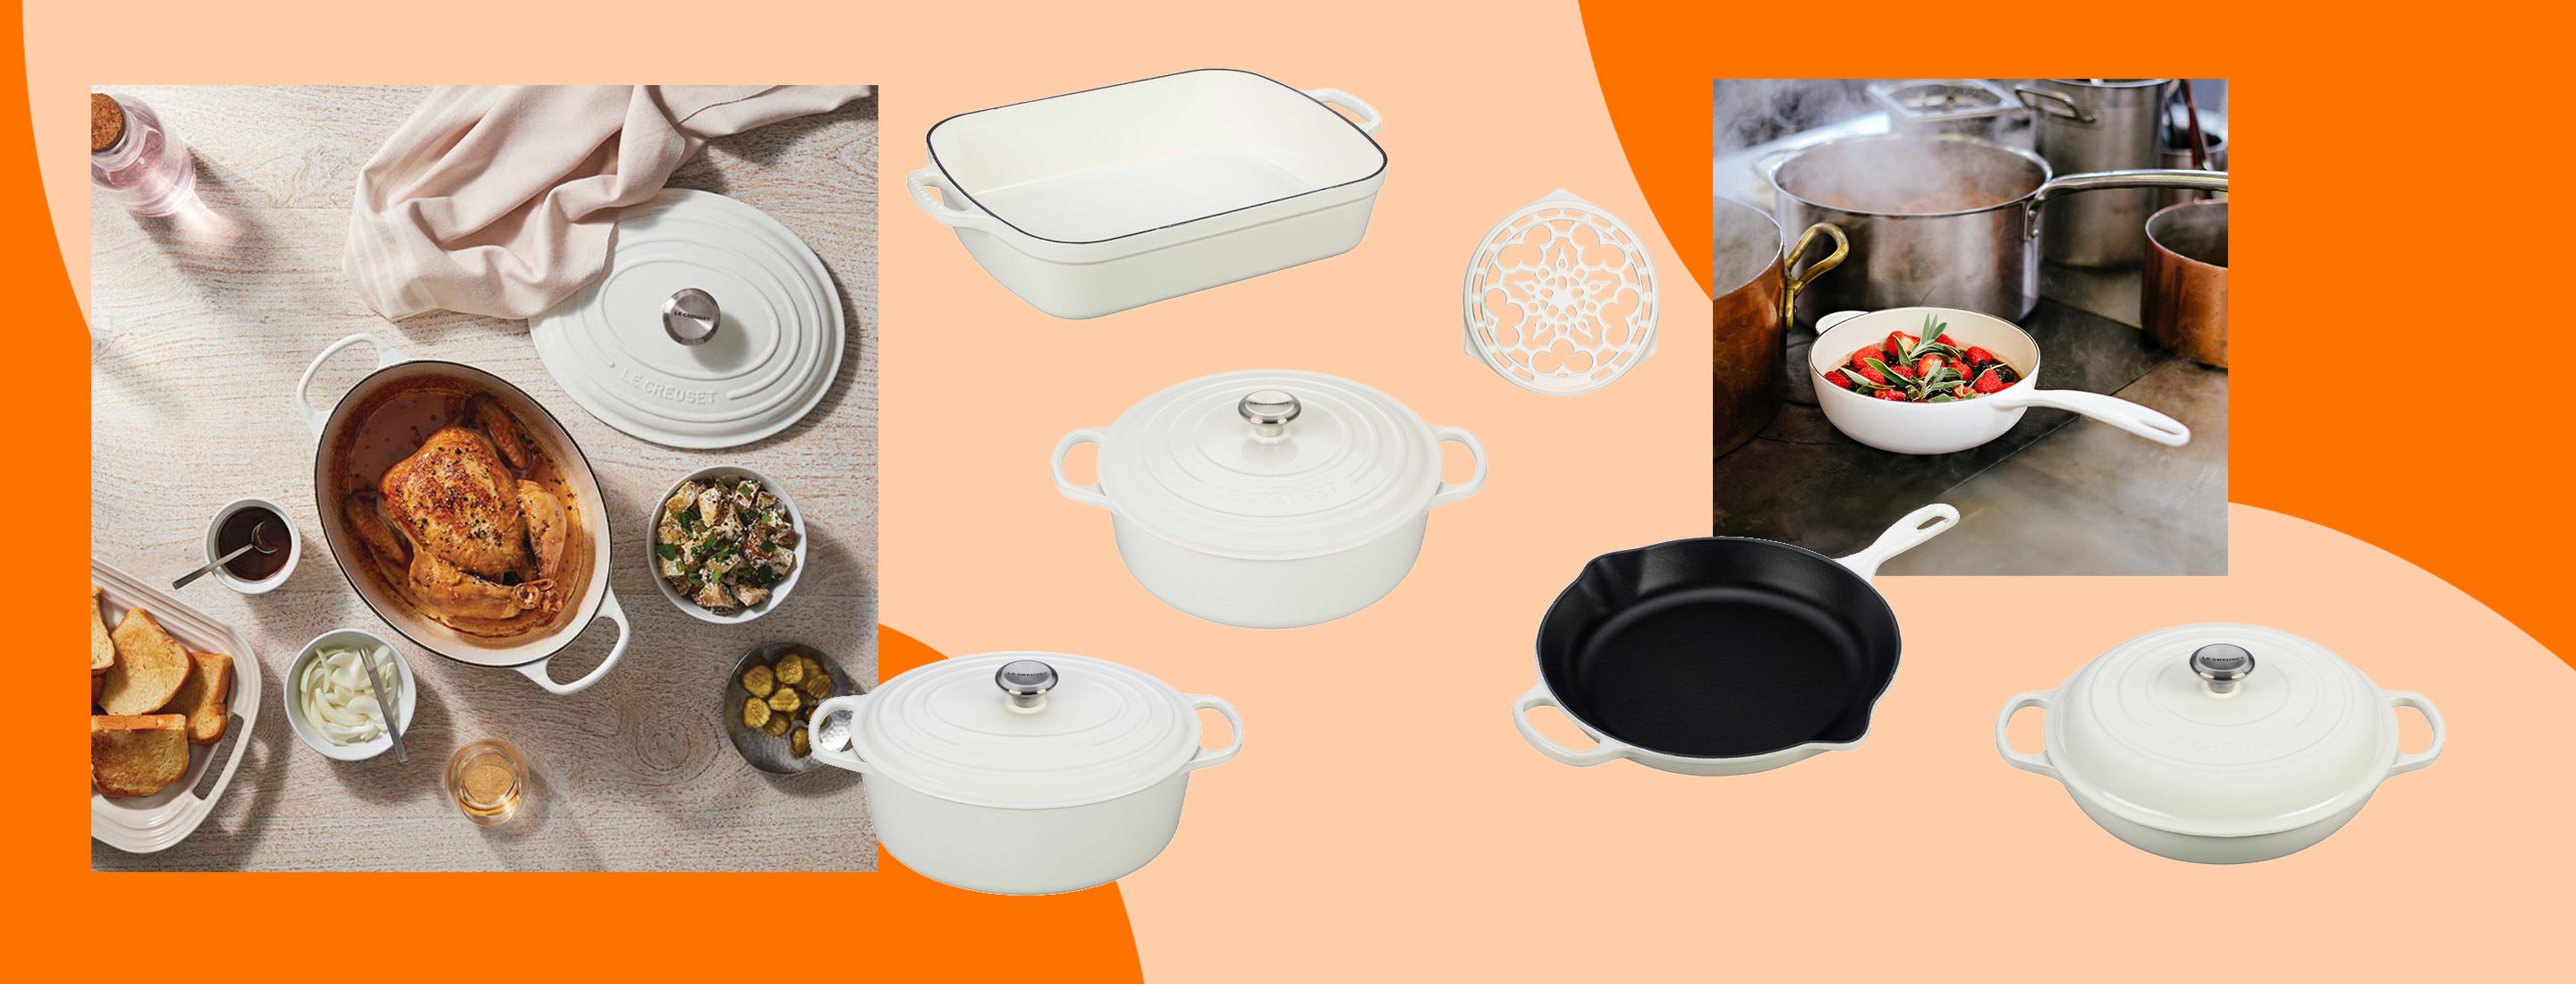 Le Creuset's All-white Party